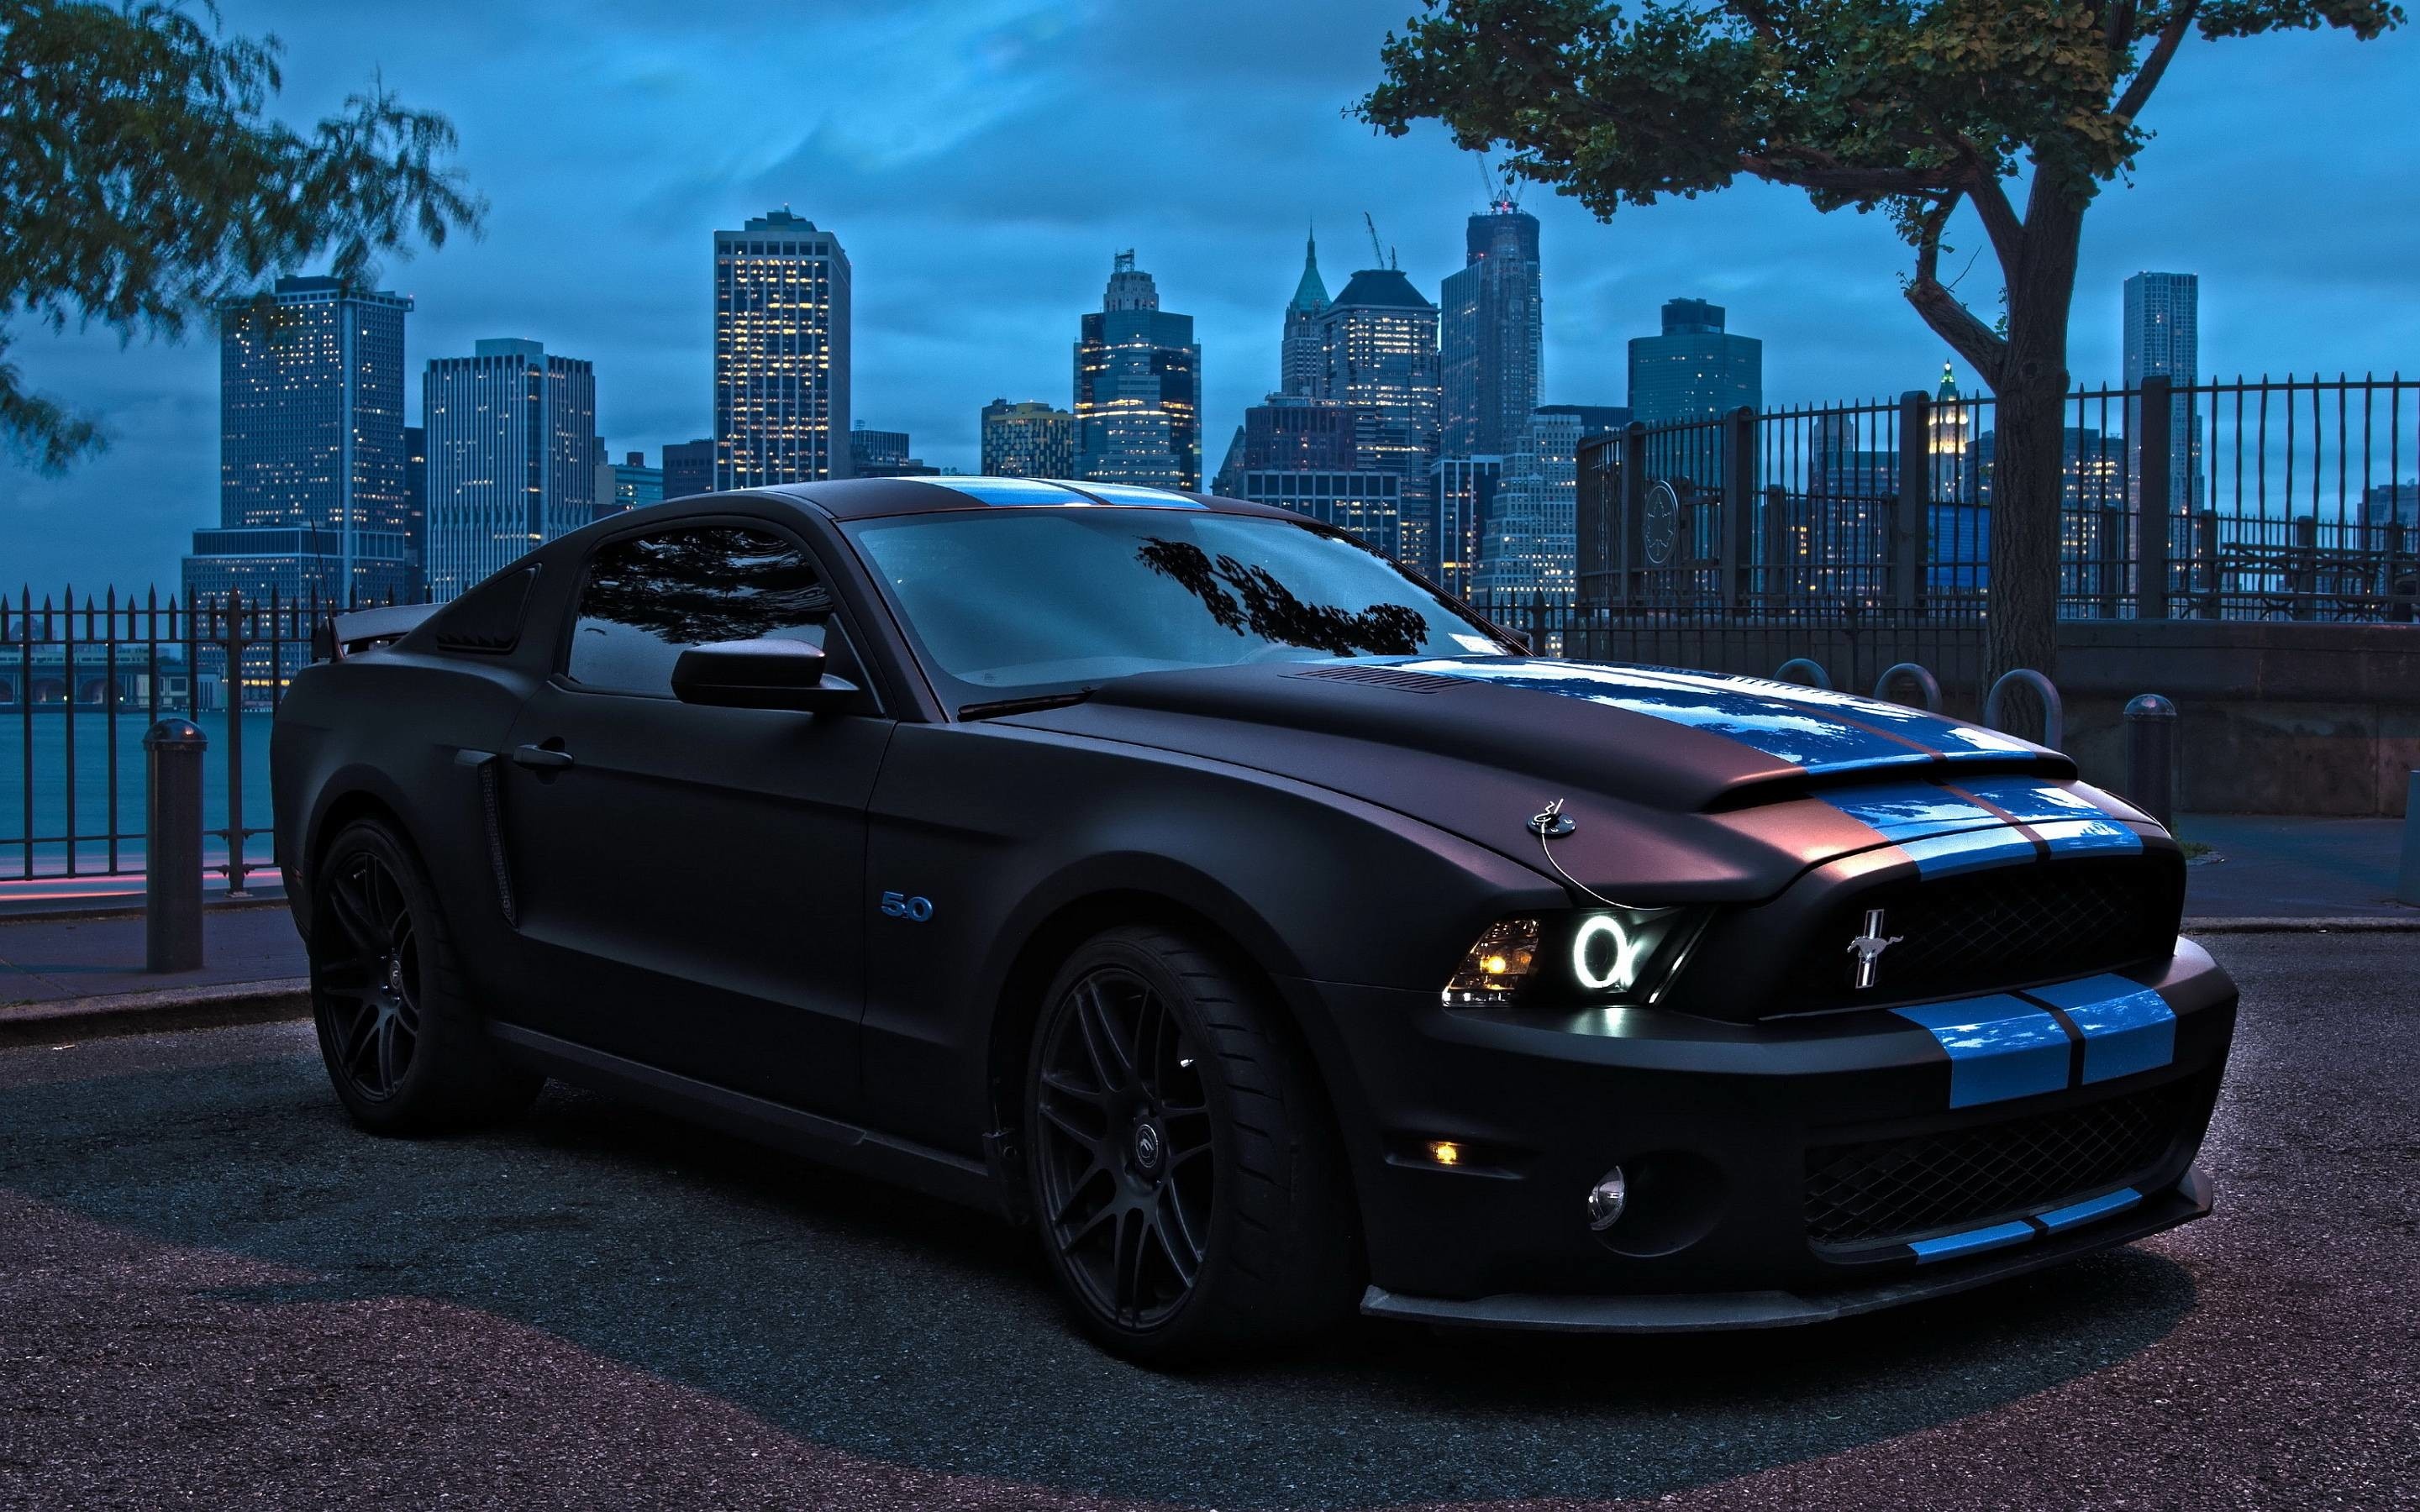 Ford Mustang, Diverse models collage, Automotive legacy, Collector's favorites, Sporty appeal, 2880x1800 HD Desktop